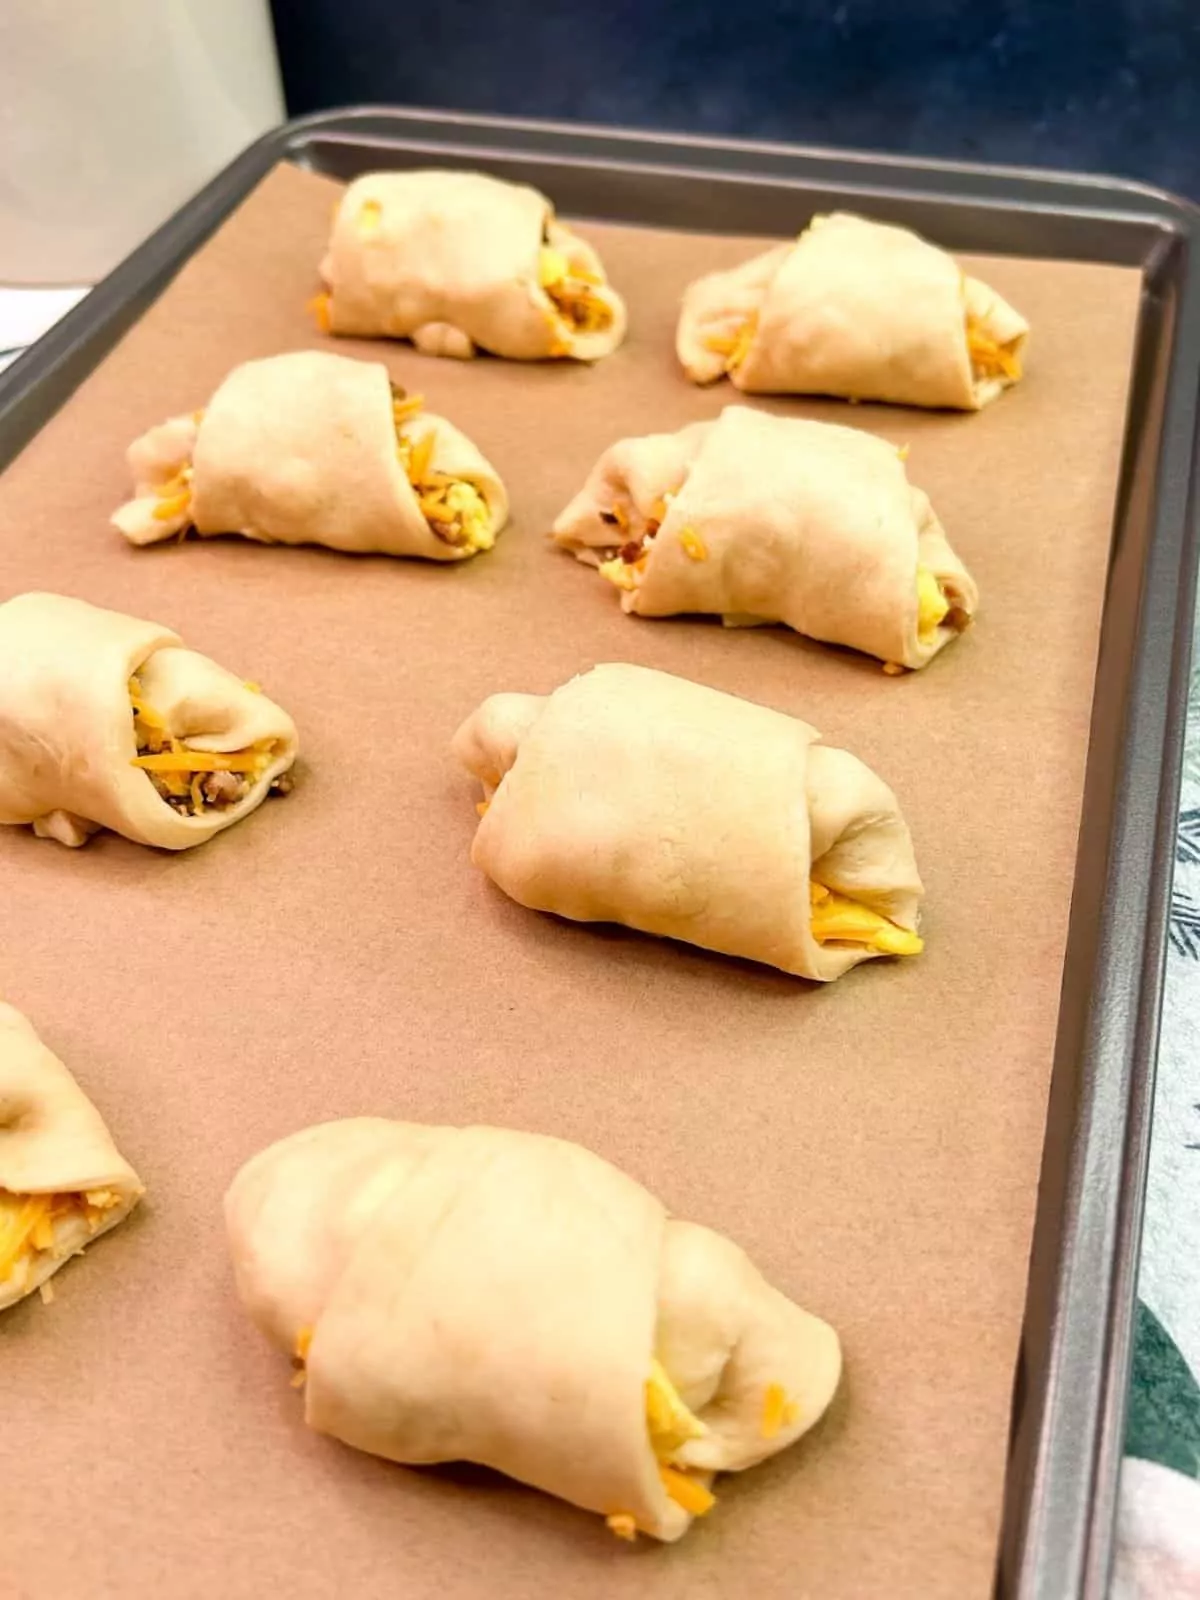 unbaked crescent rolls on baking tray lined with parchment paper.